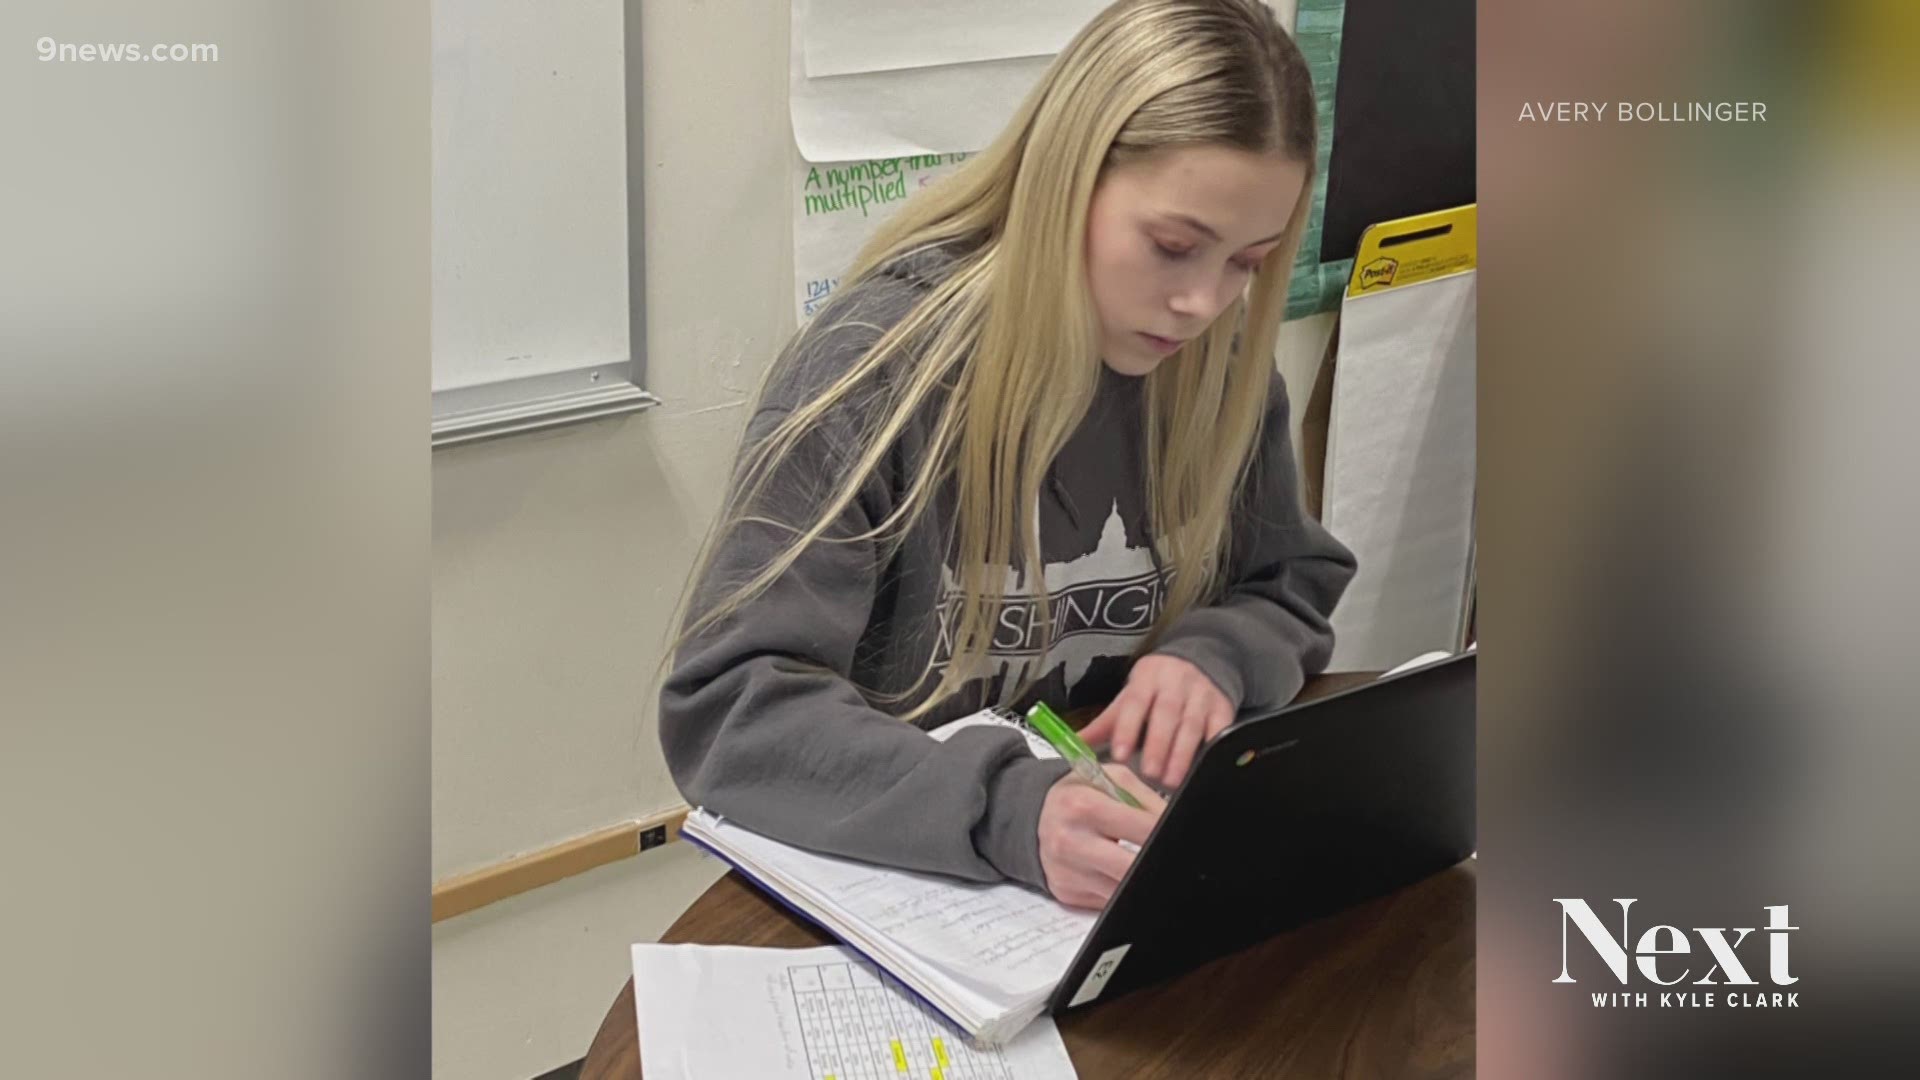 While most of her fellow high school classmates were trying to decide what to do after they graduate, Avery Bollinger, in Wiley, was already enrolled in college.